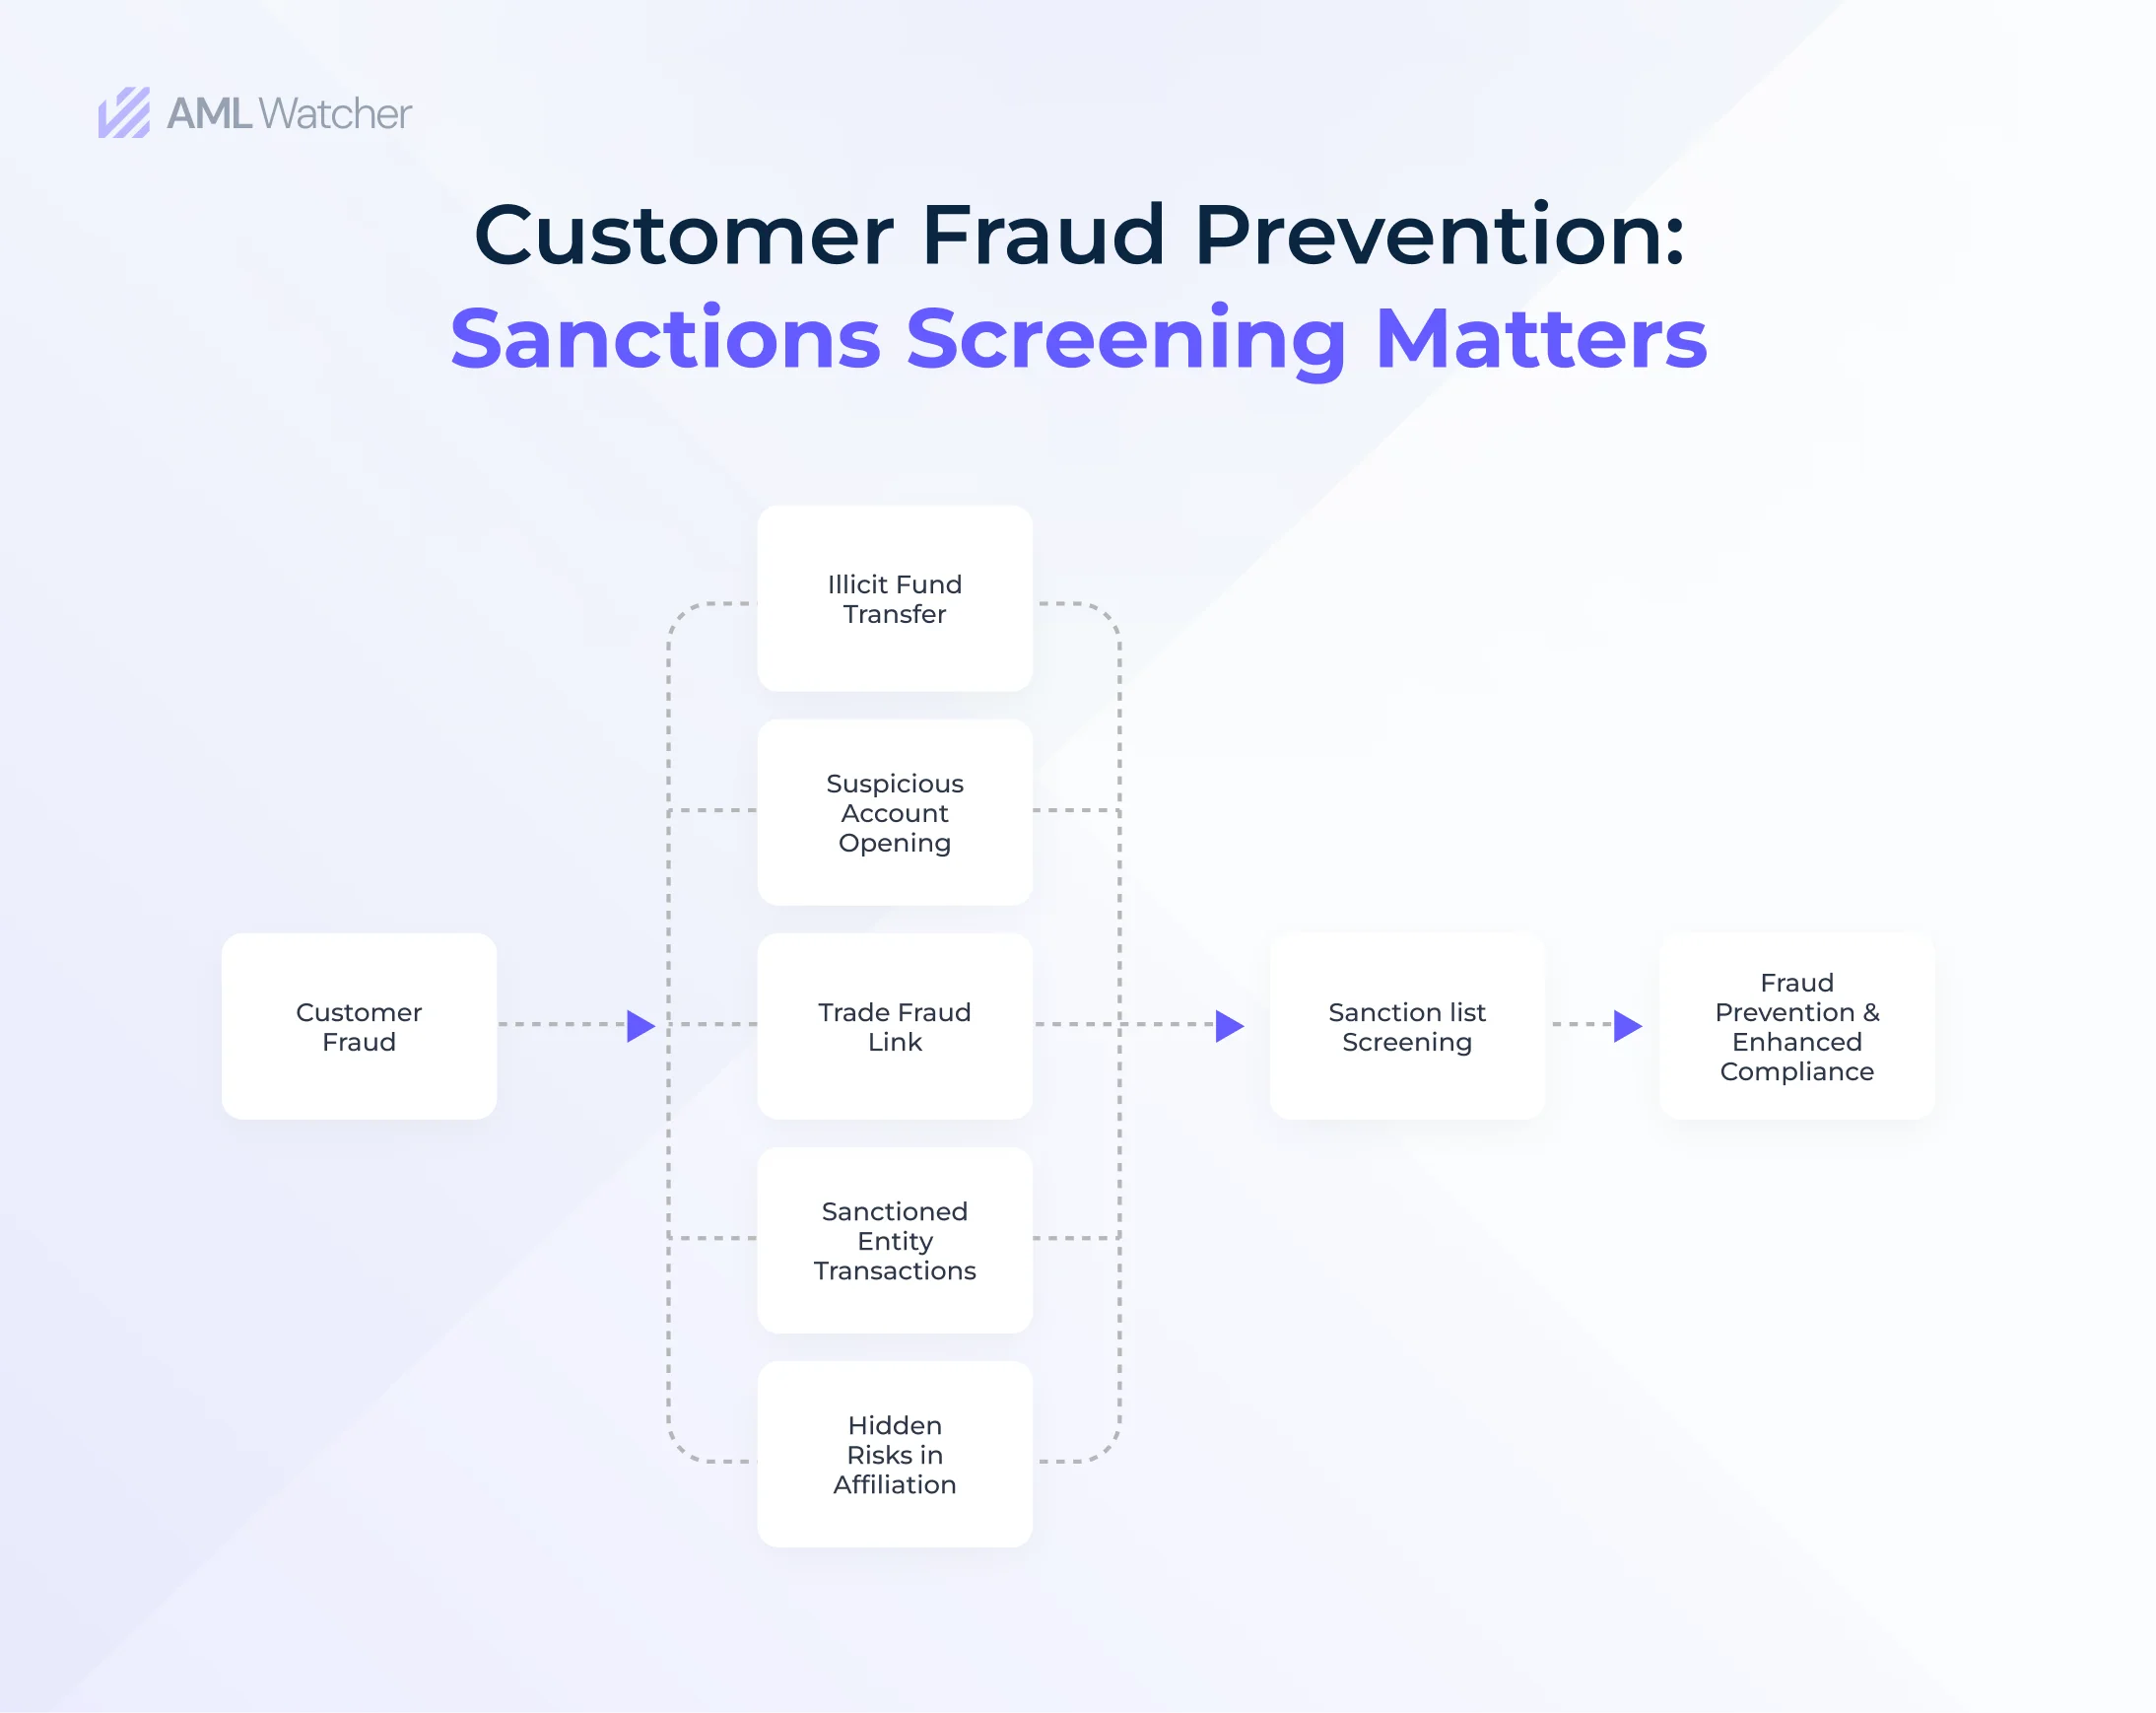 A pictorial understanding of potential customer frauds and how sanction screening helps to mitigate them.